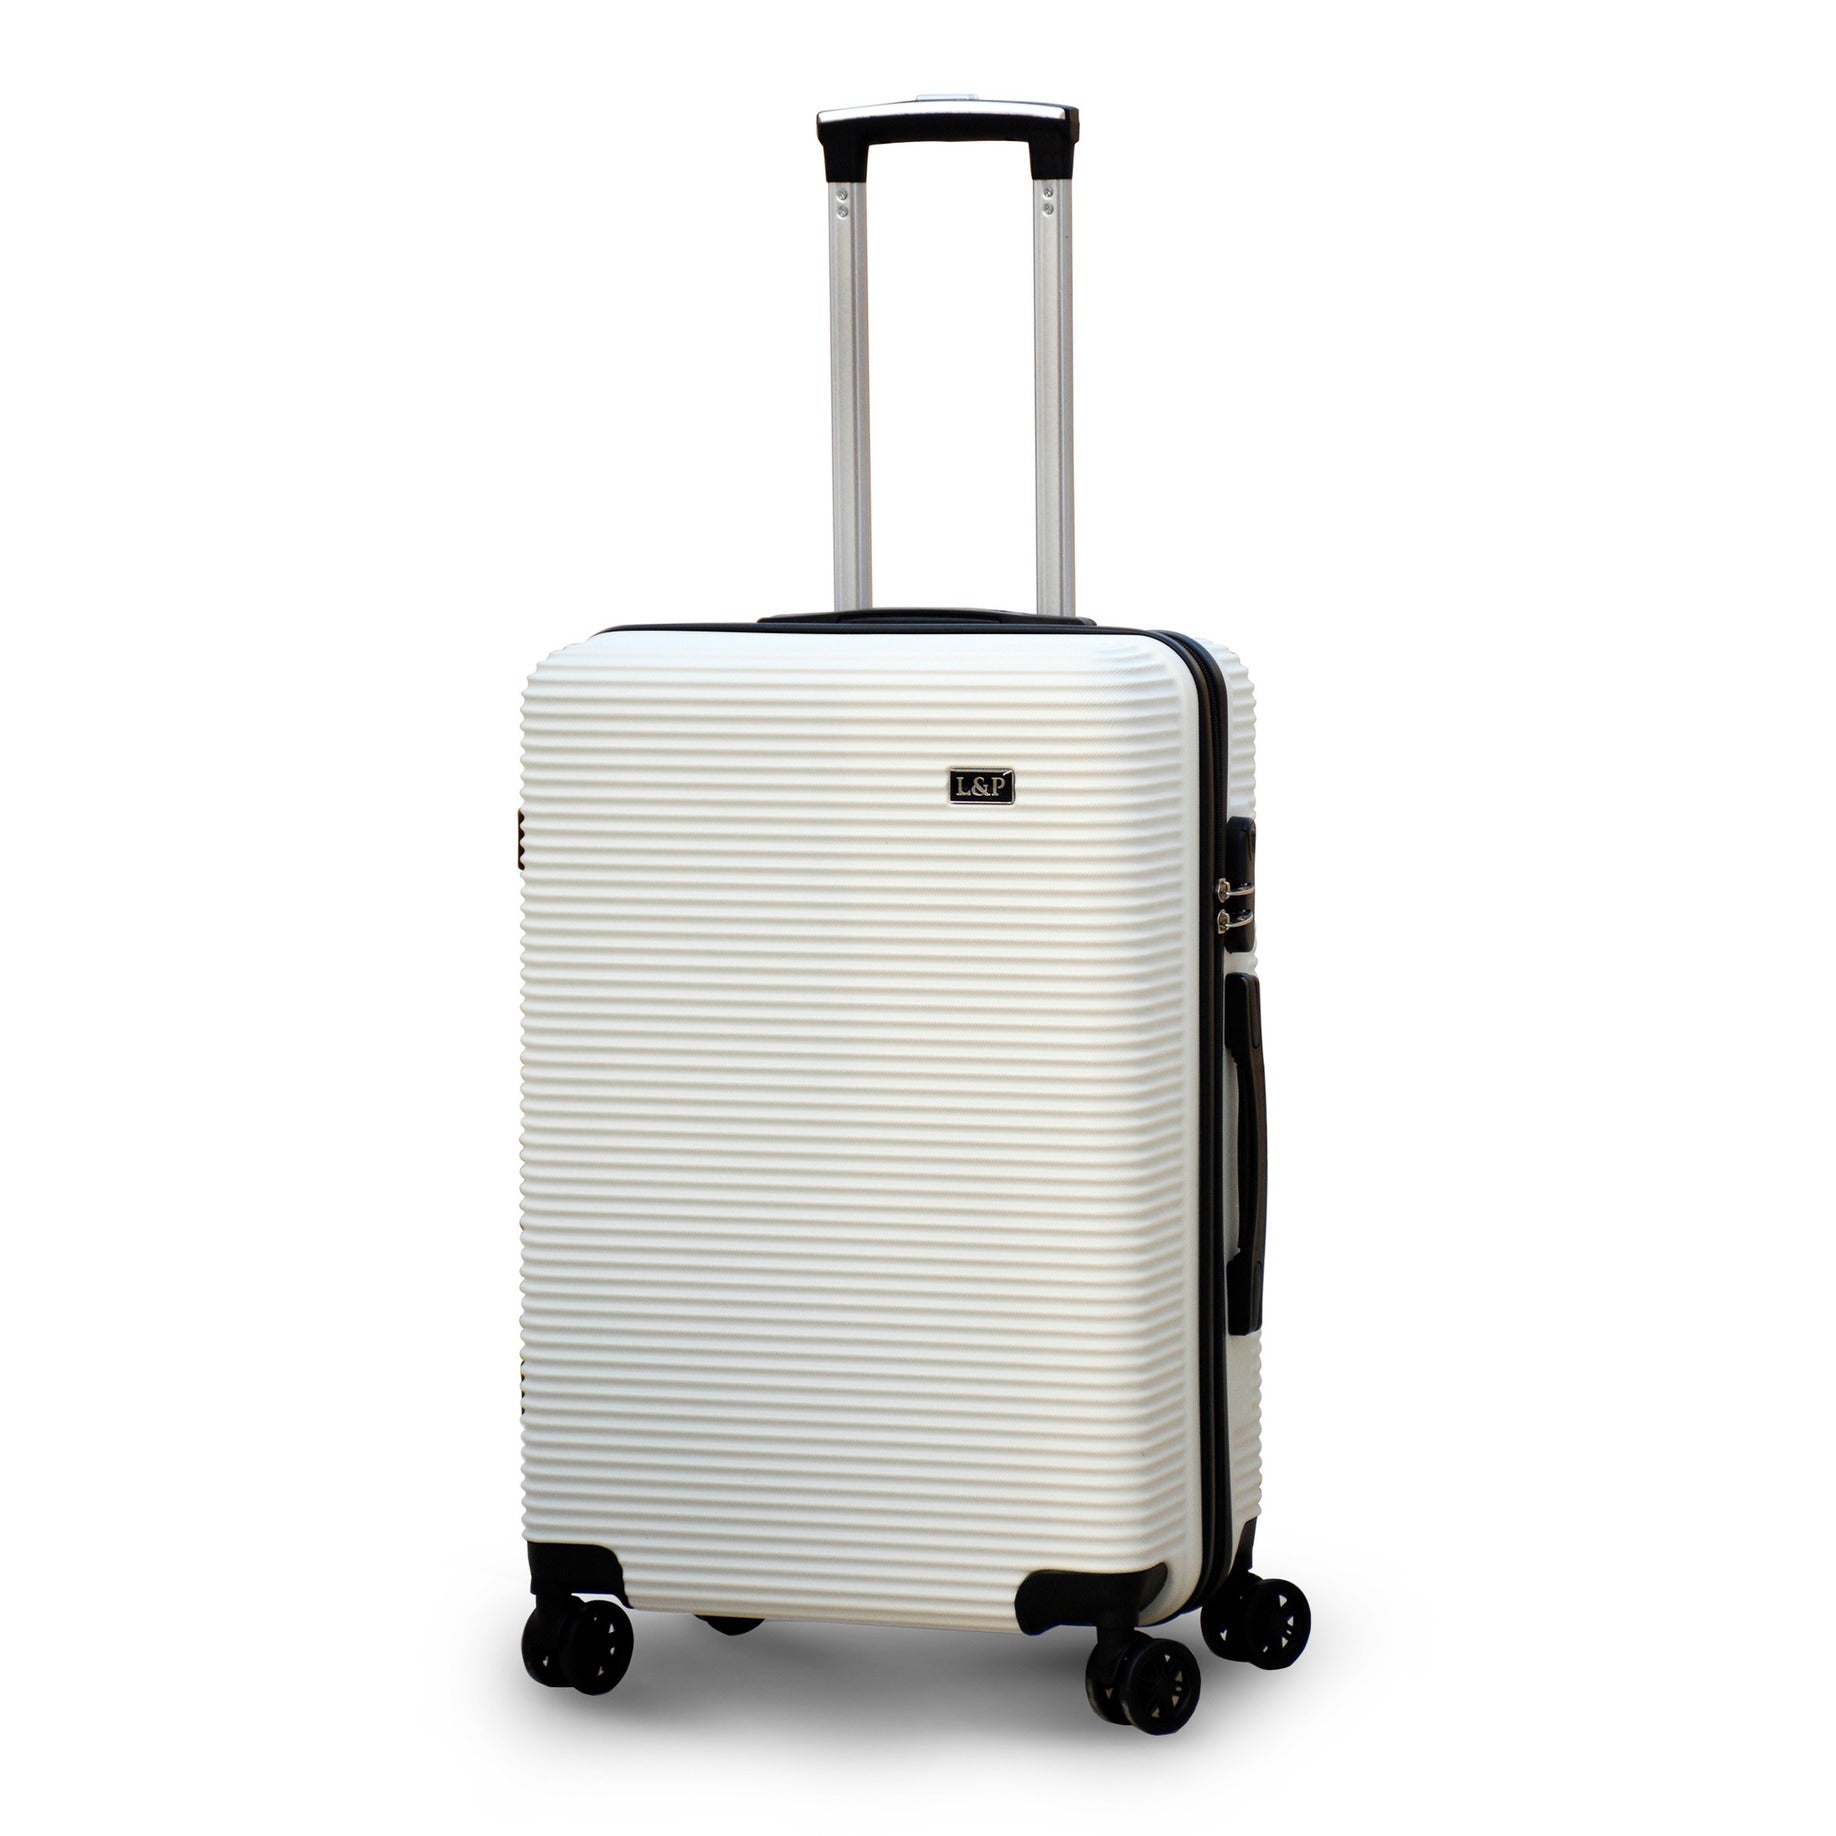 24" White Colour JIAN ABS Line Luggage Lightweight Hard Case Trolley Bag With Spinner Wheel Zaappy.com